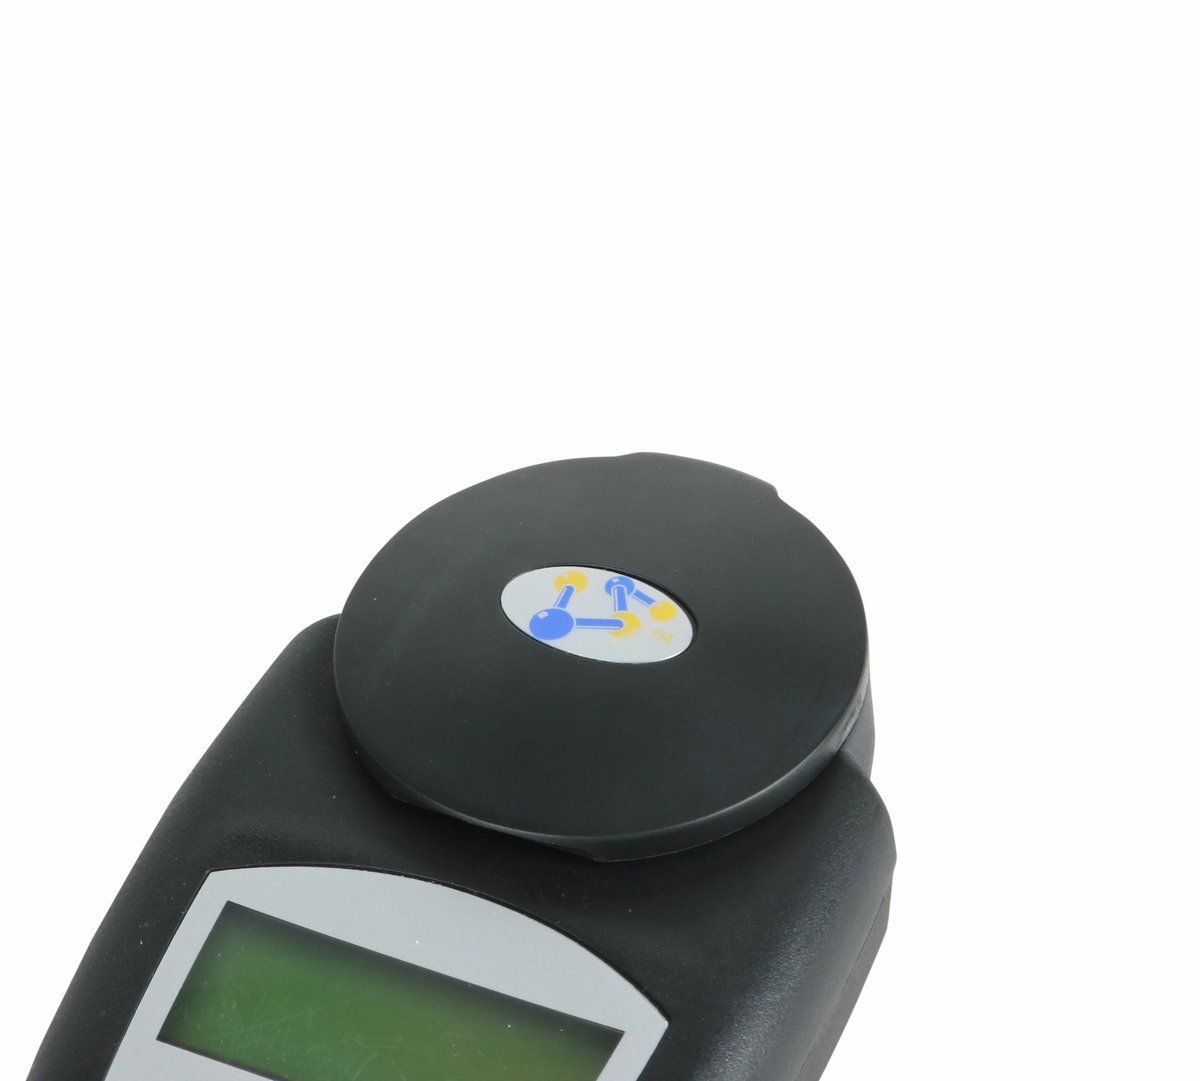 Misco Palm ABBE Digital Handheld Refractometer, Glycerine and Propylene Glycol Scales, Concentration, Freeze Point Celsius